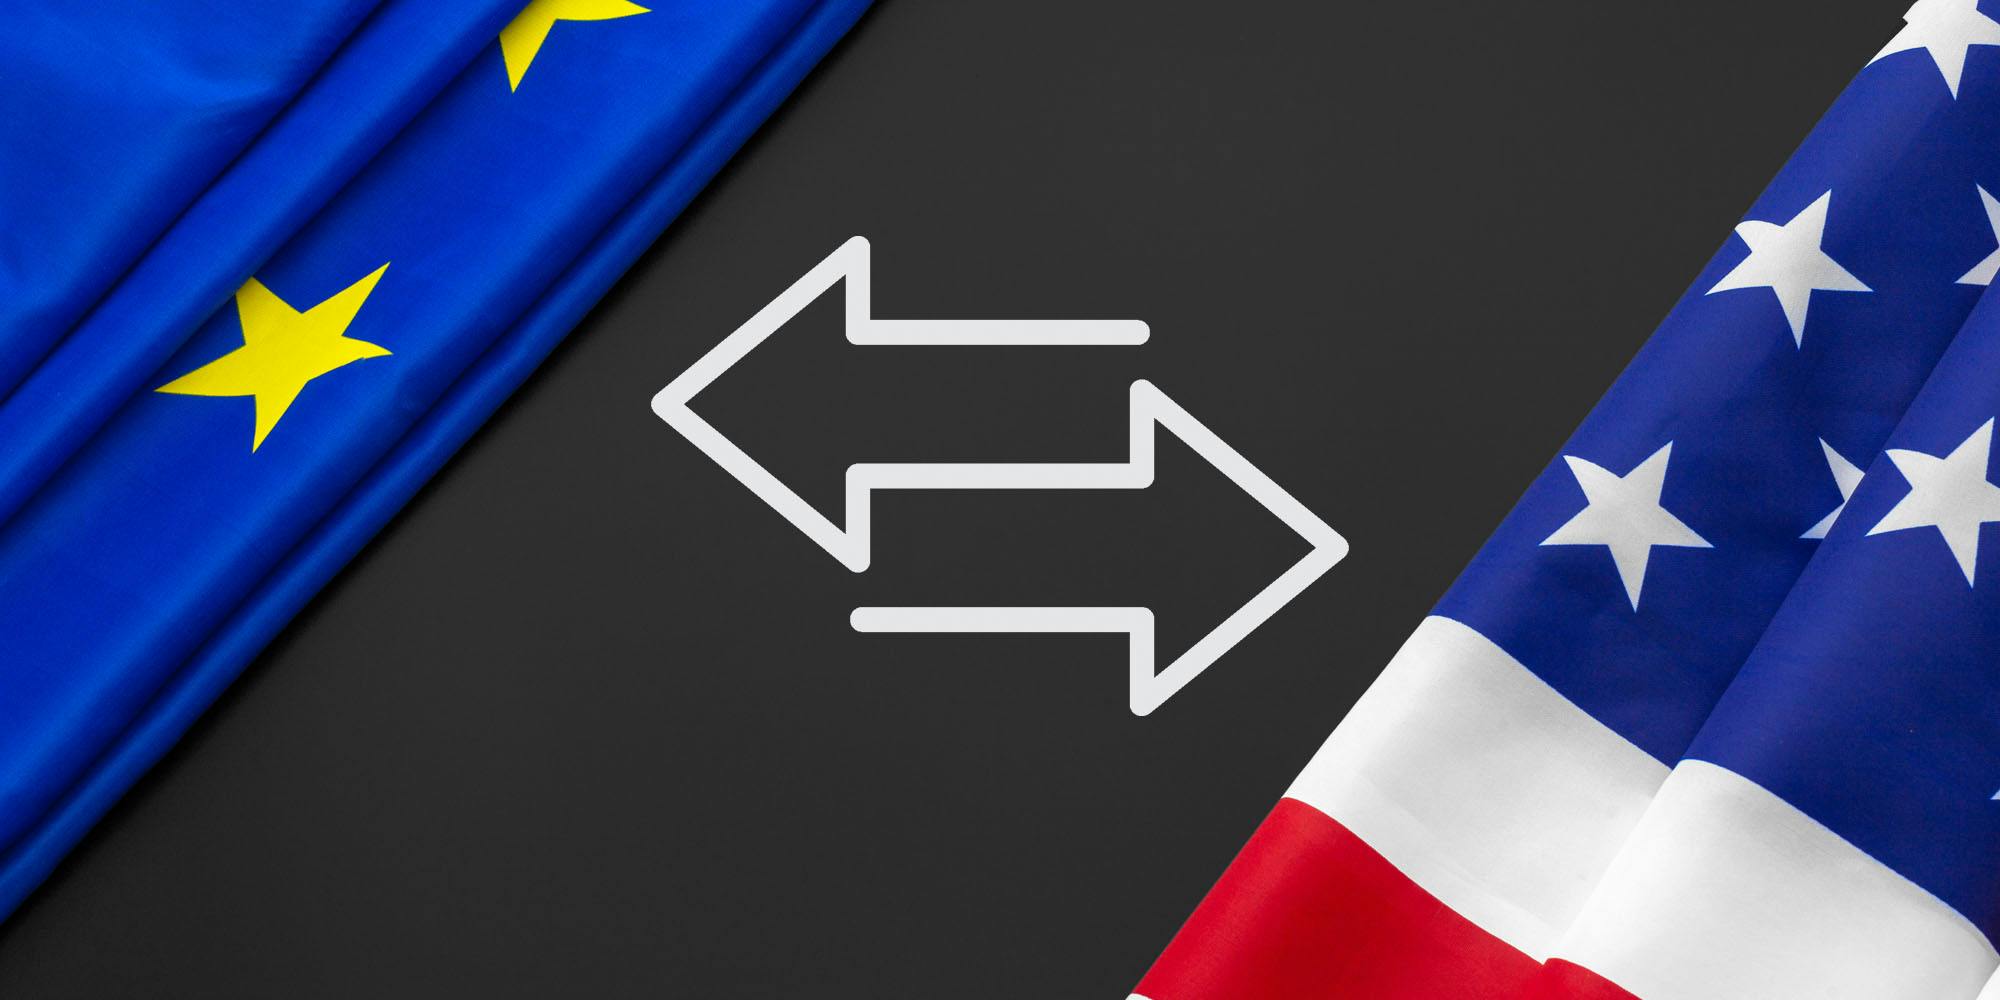 EU and US flag on grey background with arrows in center